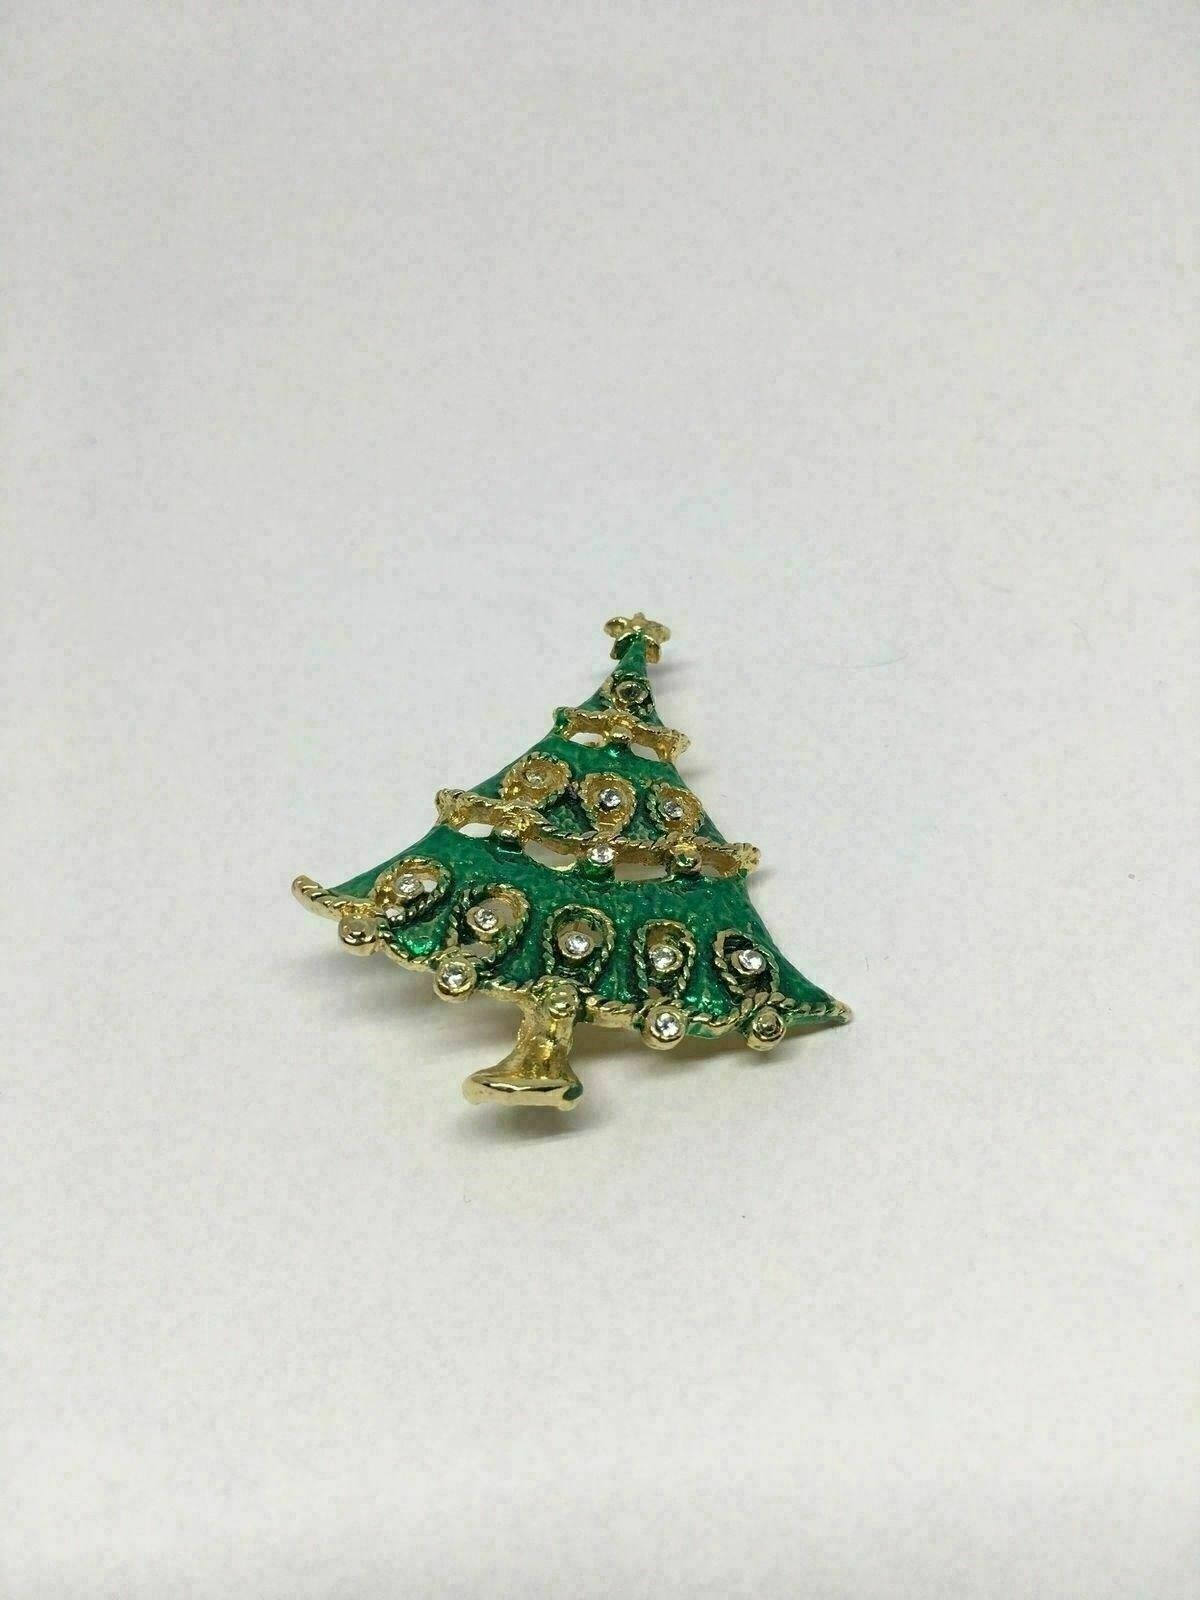 K1) Vintage Merry Christmas Holly Green Tree Gold Star Jewelry Brooch Pin